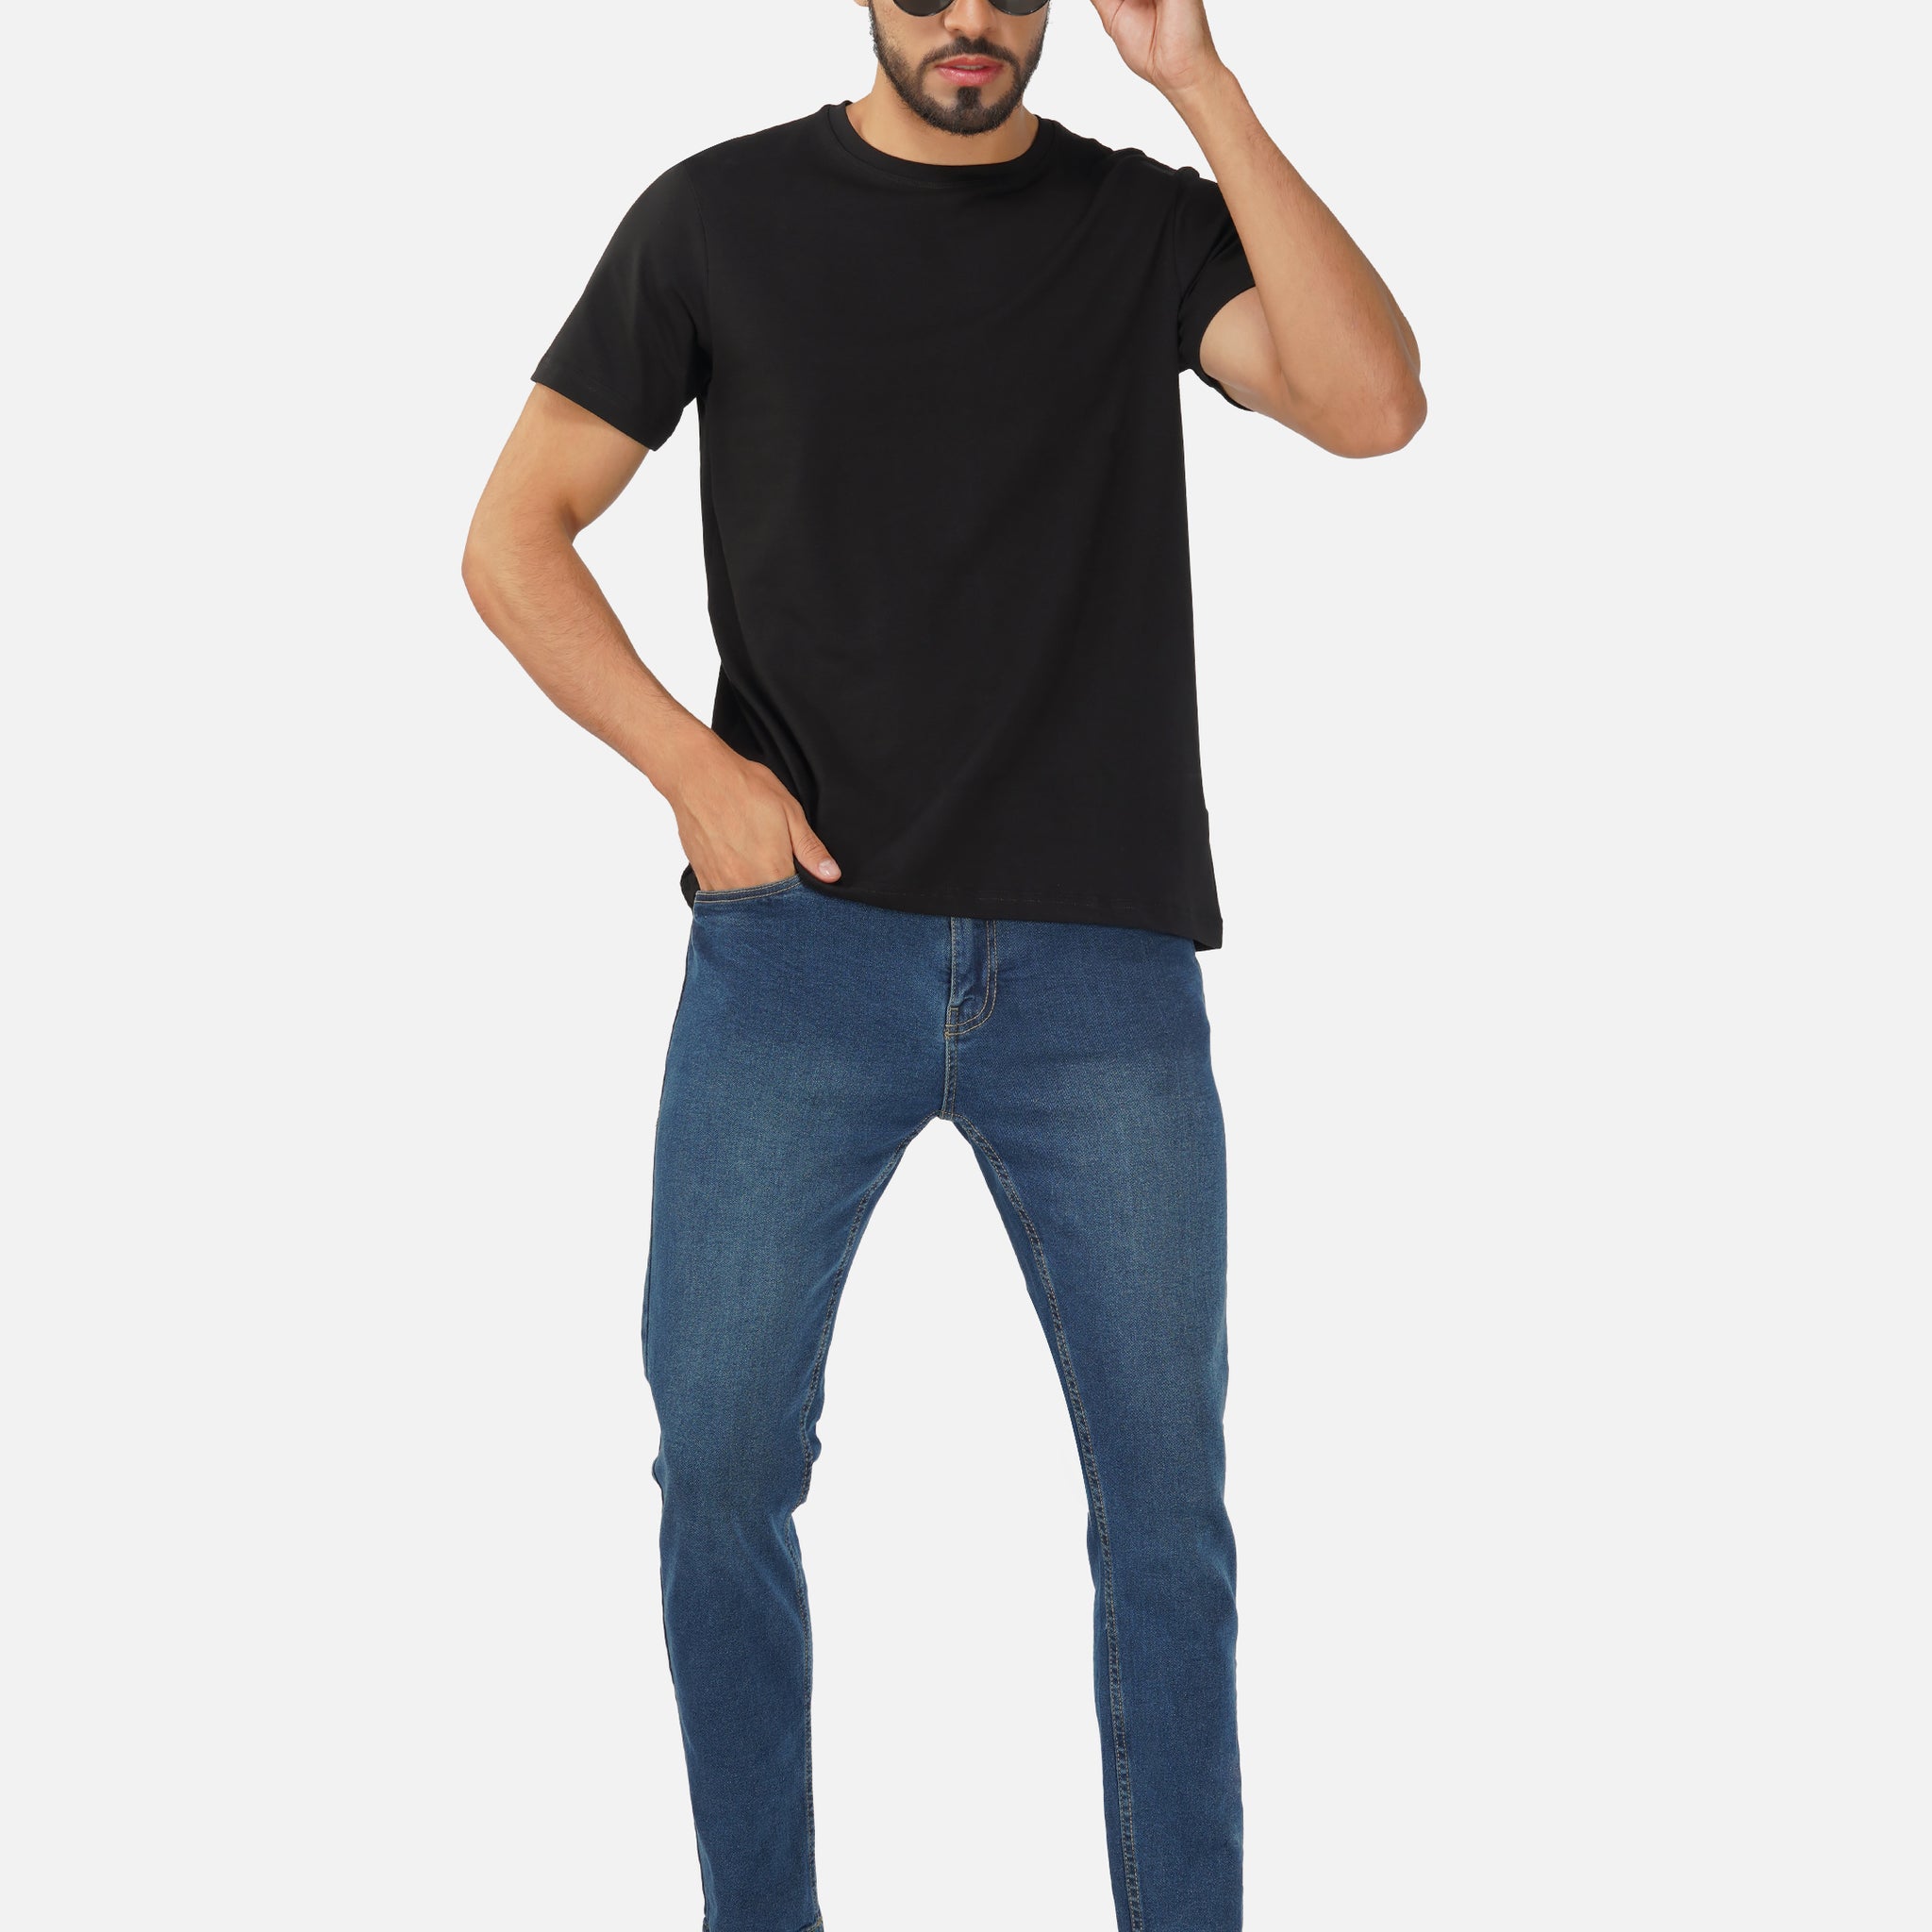 SOLID BLACK COLORED ROUND NECK TSHIRT